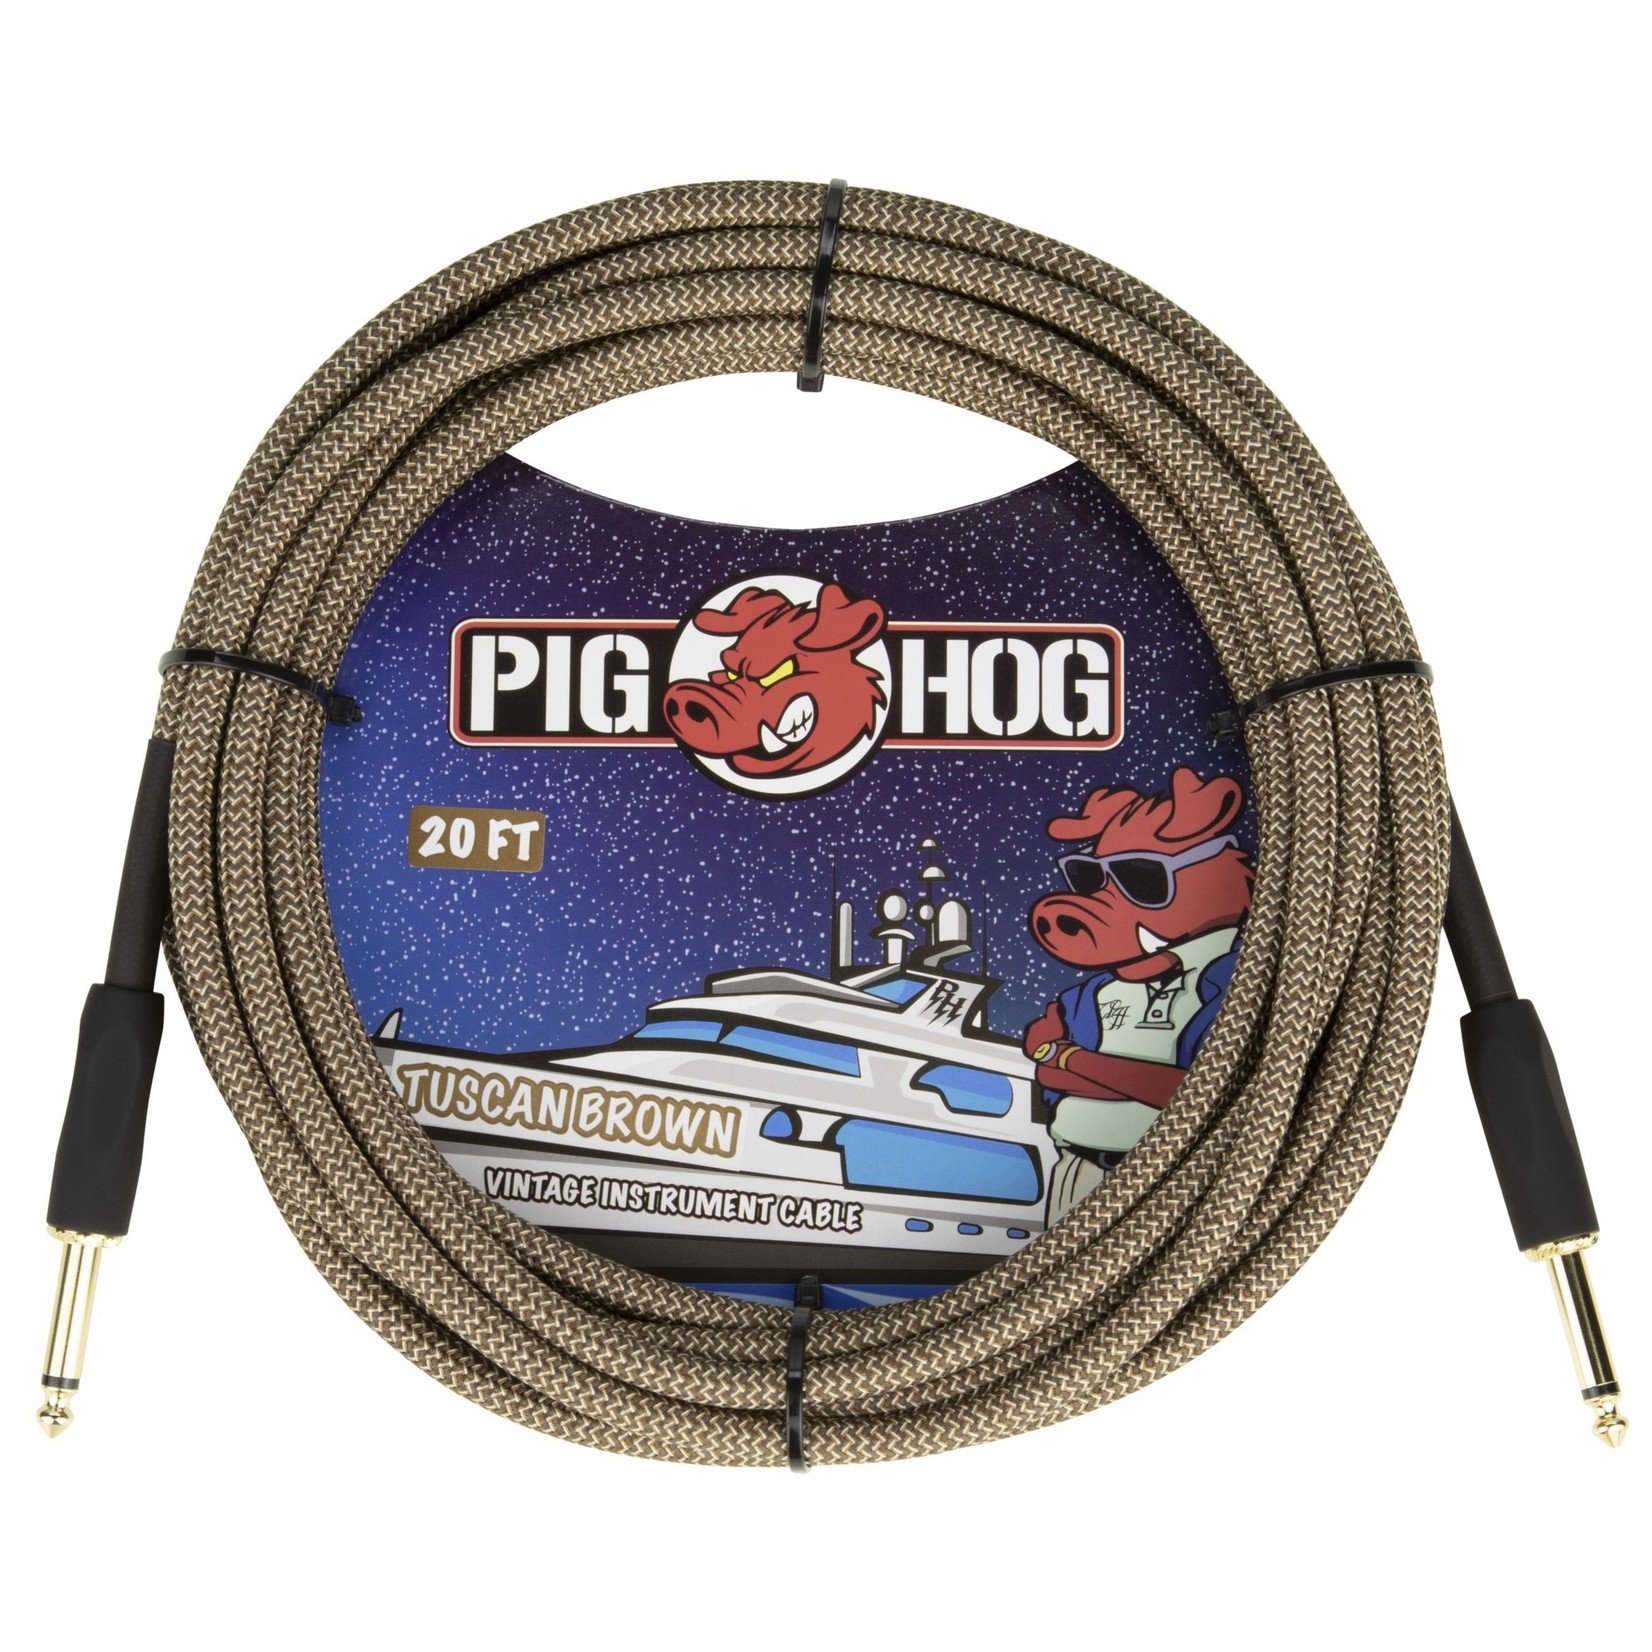 Pig Hog Pig Hog 20-Foot Vintage Woven Instrument Cable, 1/4" Straight-Straight, Tuscan Brown